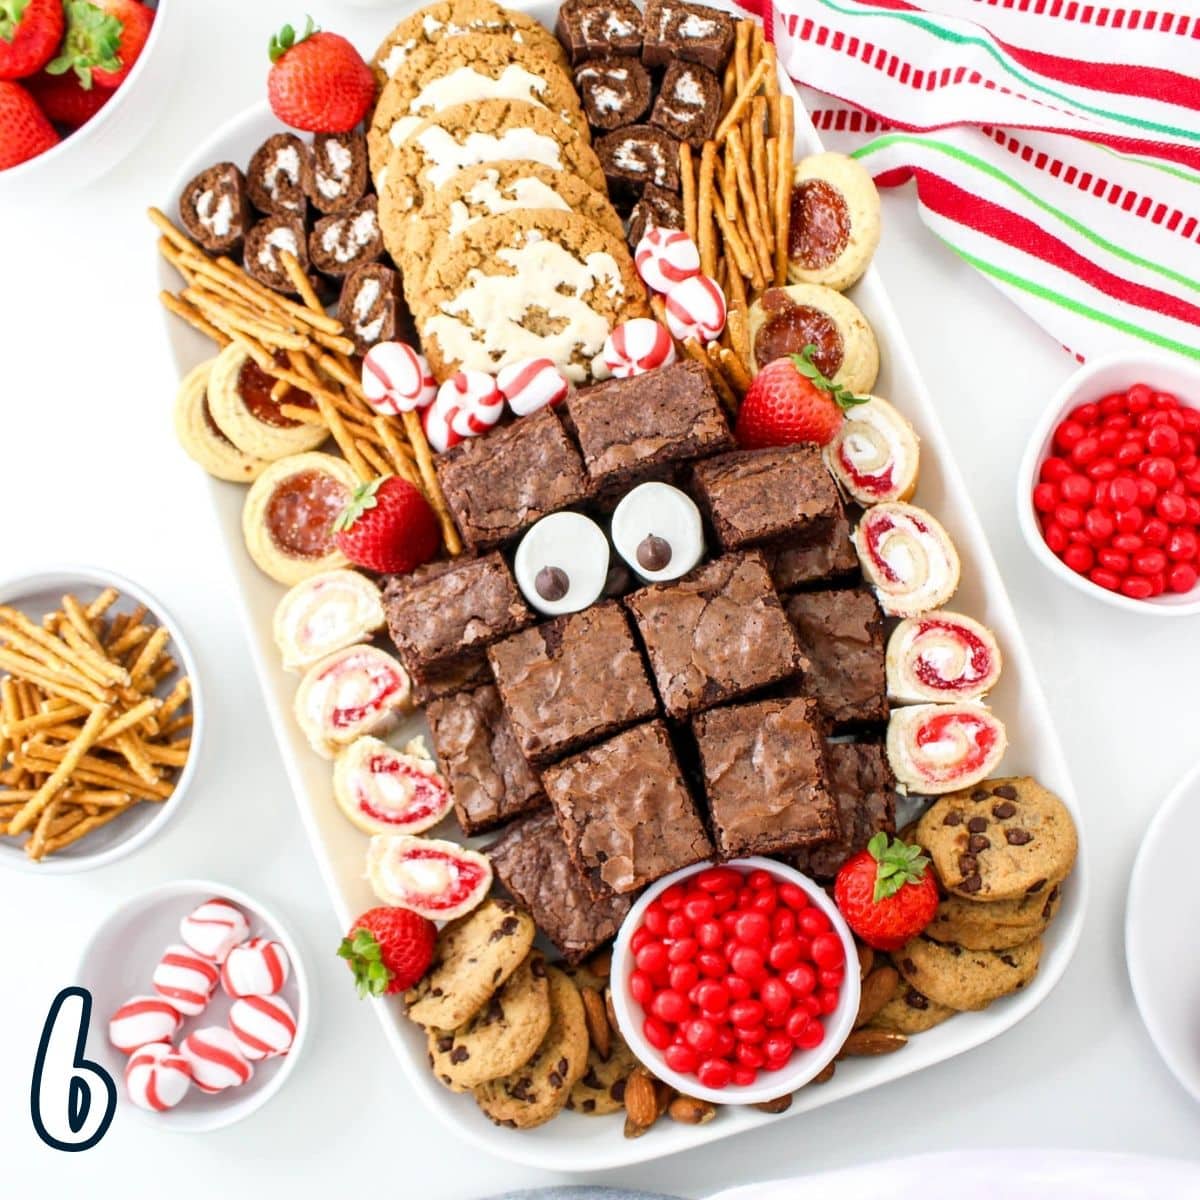 A christmas dessert platter with cookies and brownies.